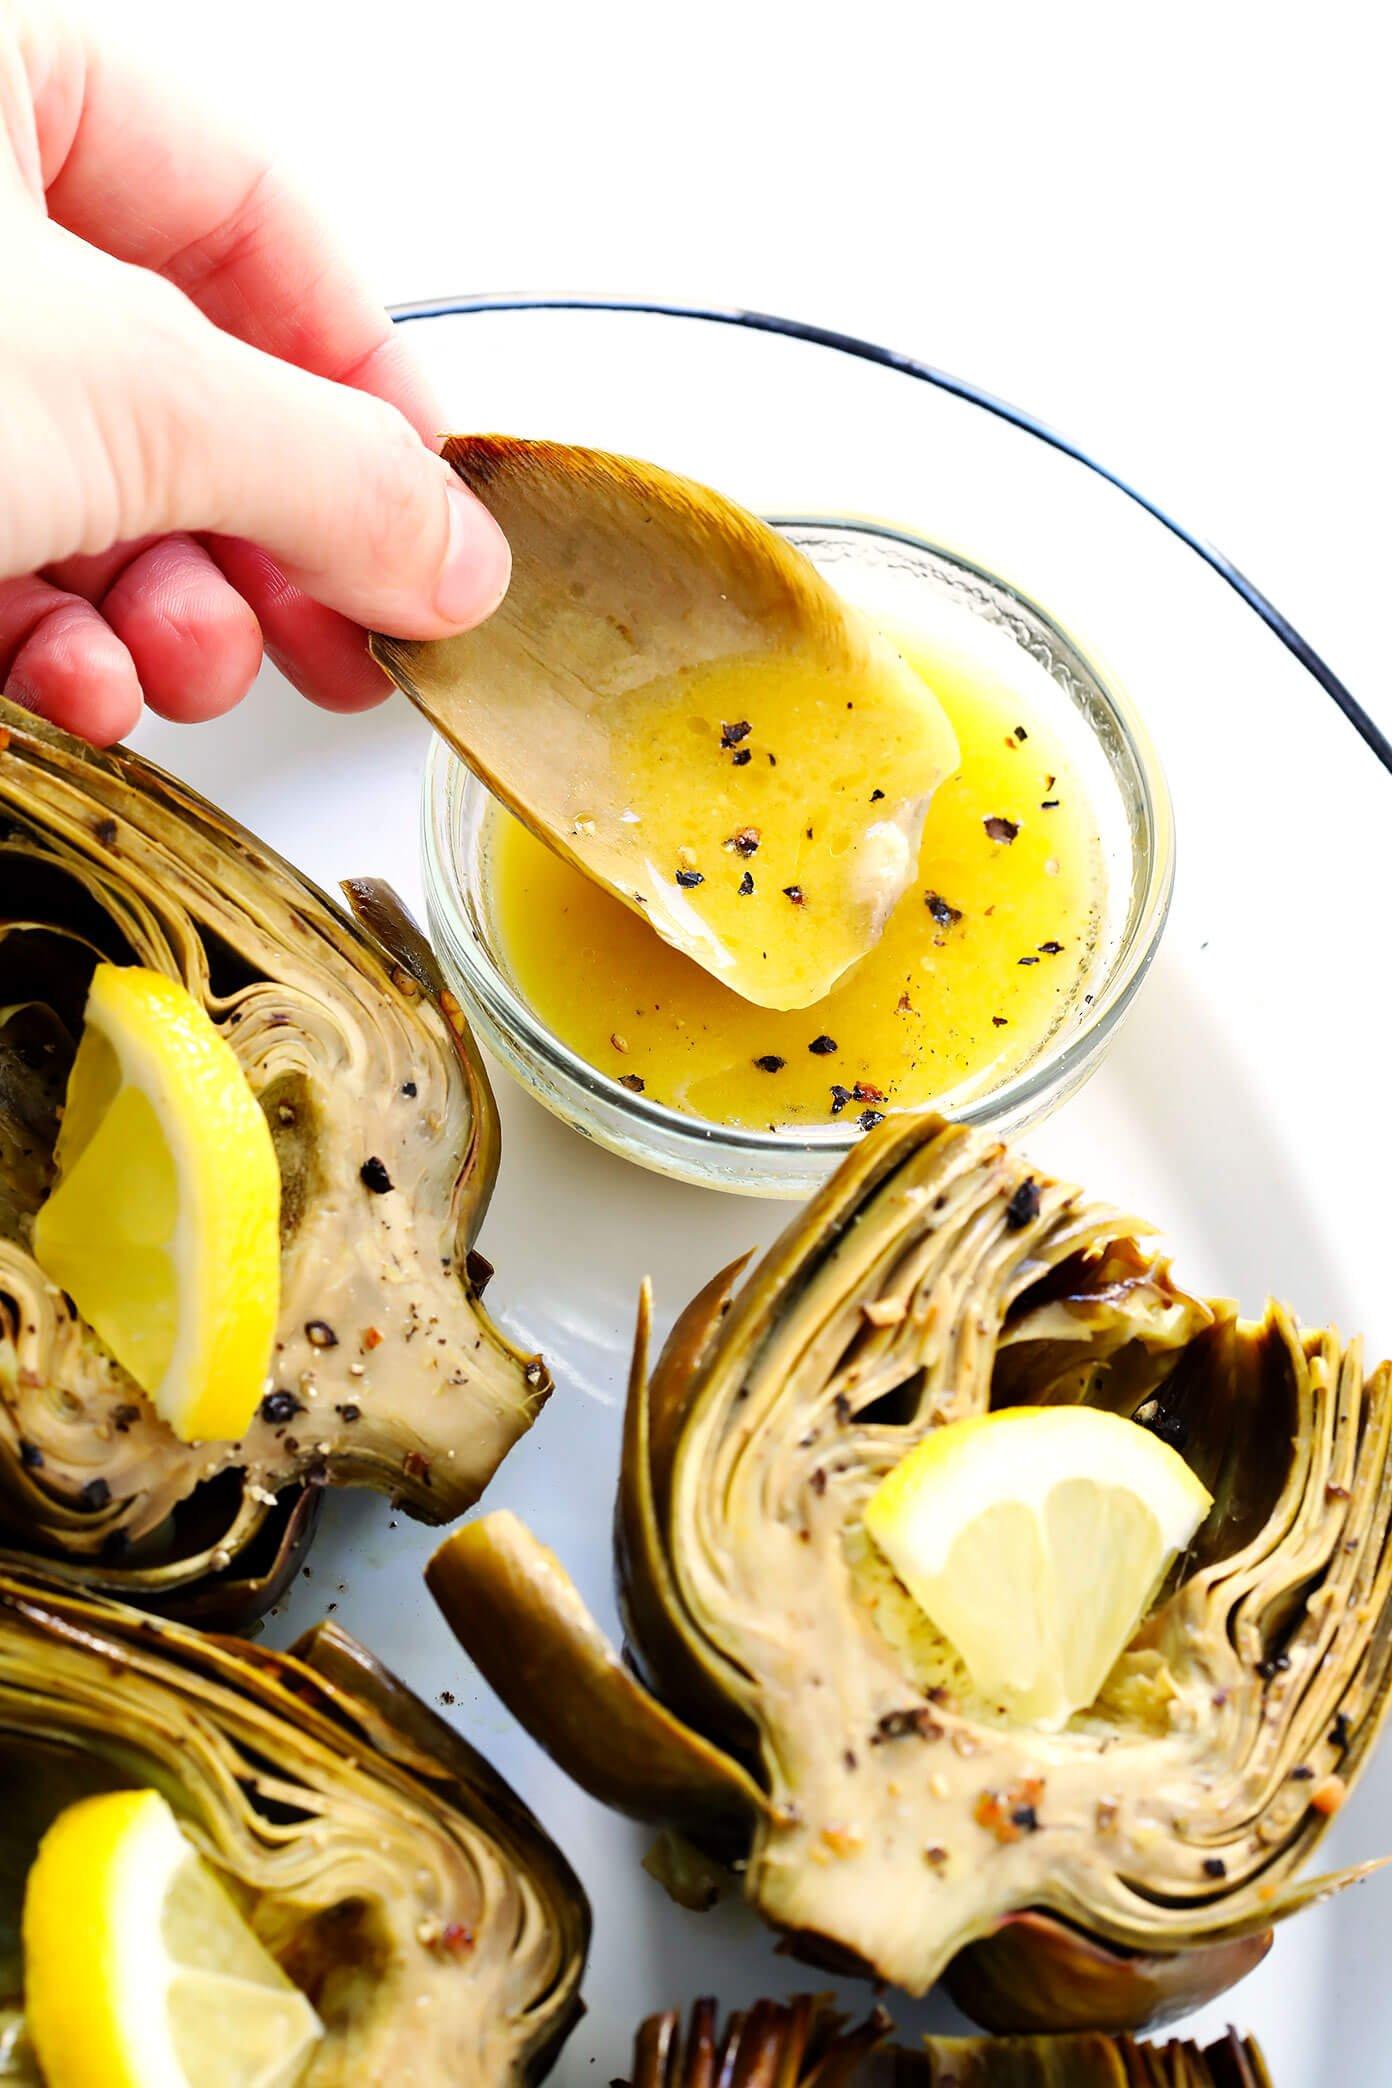 Oven Roasted Artichokes with Lemon Butter Dipping Sauce